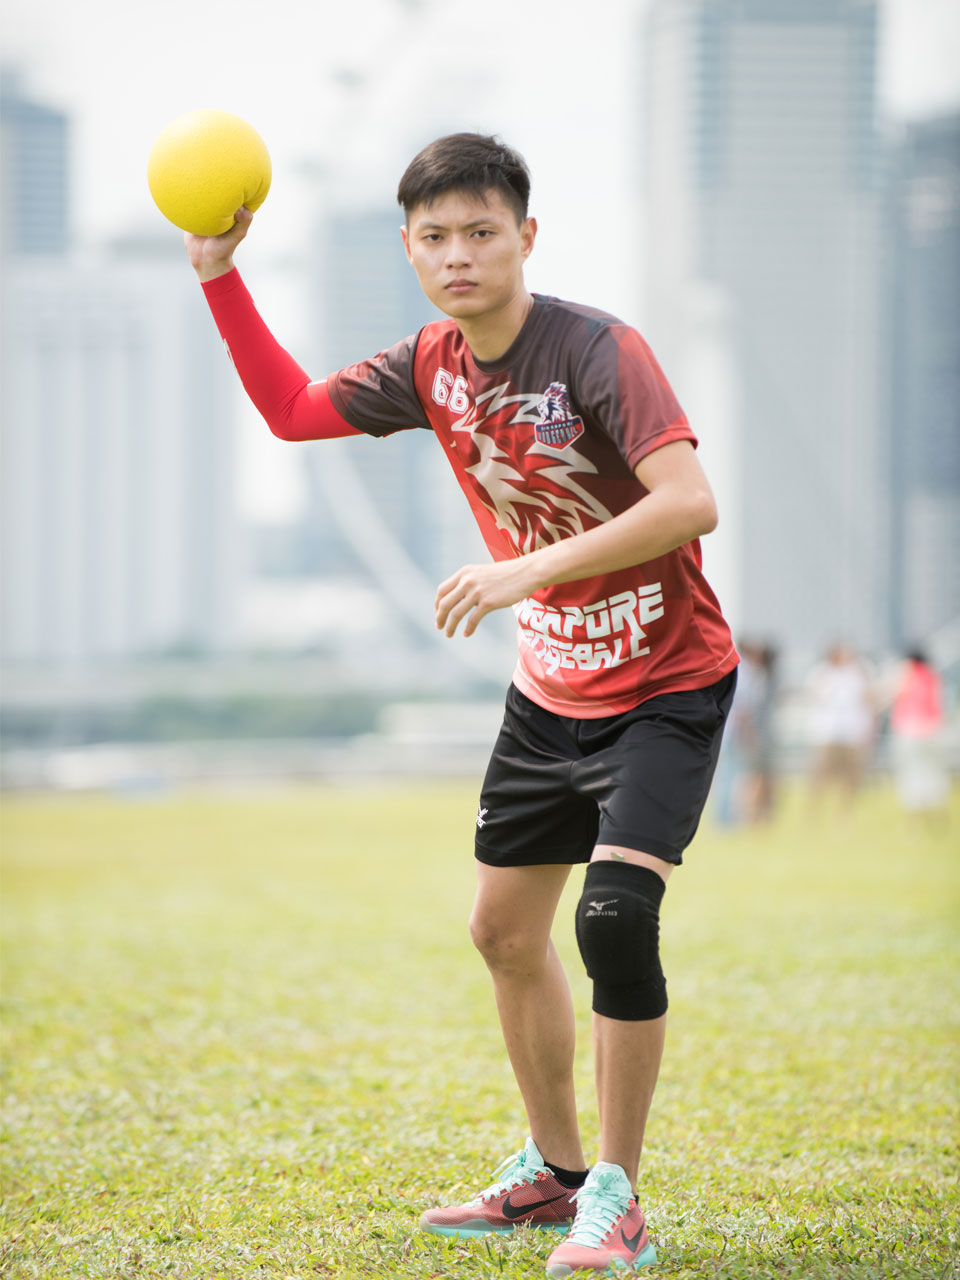 Meet the Singapore Dodgeball Team: Running for Top Accolades at the World Championships